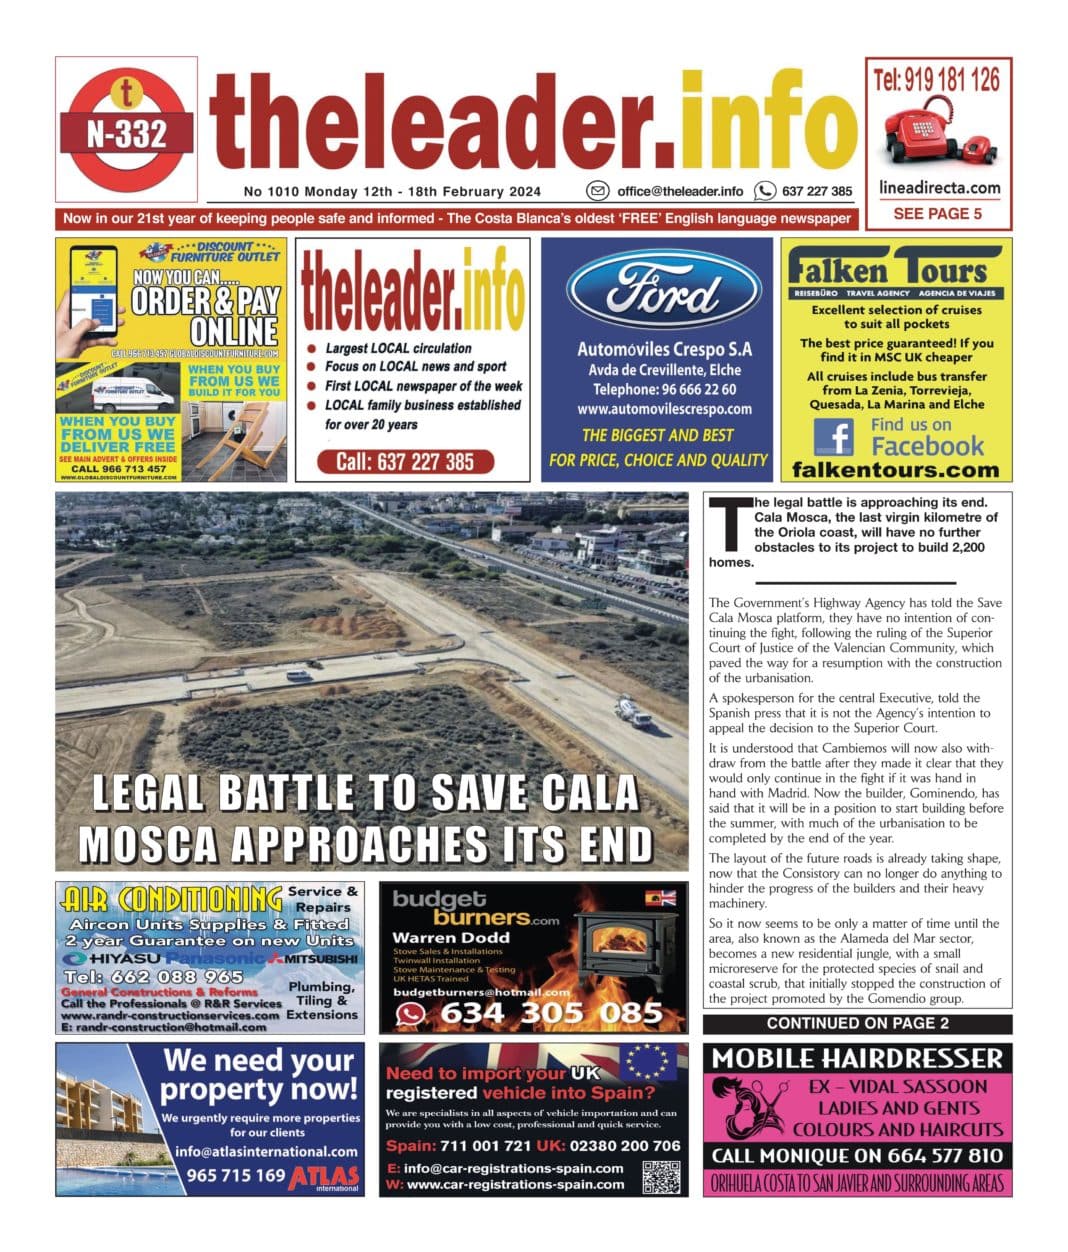 The Leader Newspaper Edition 1010